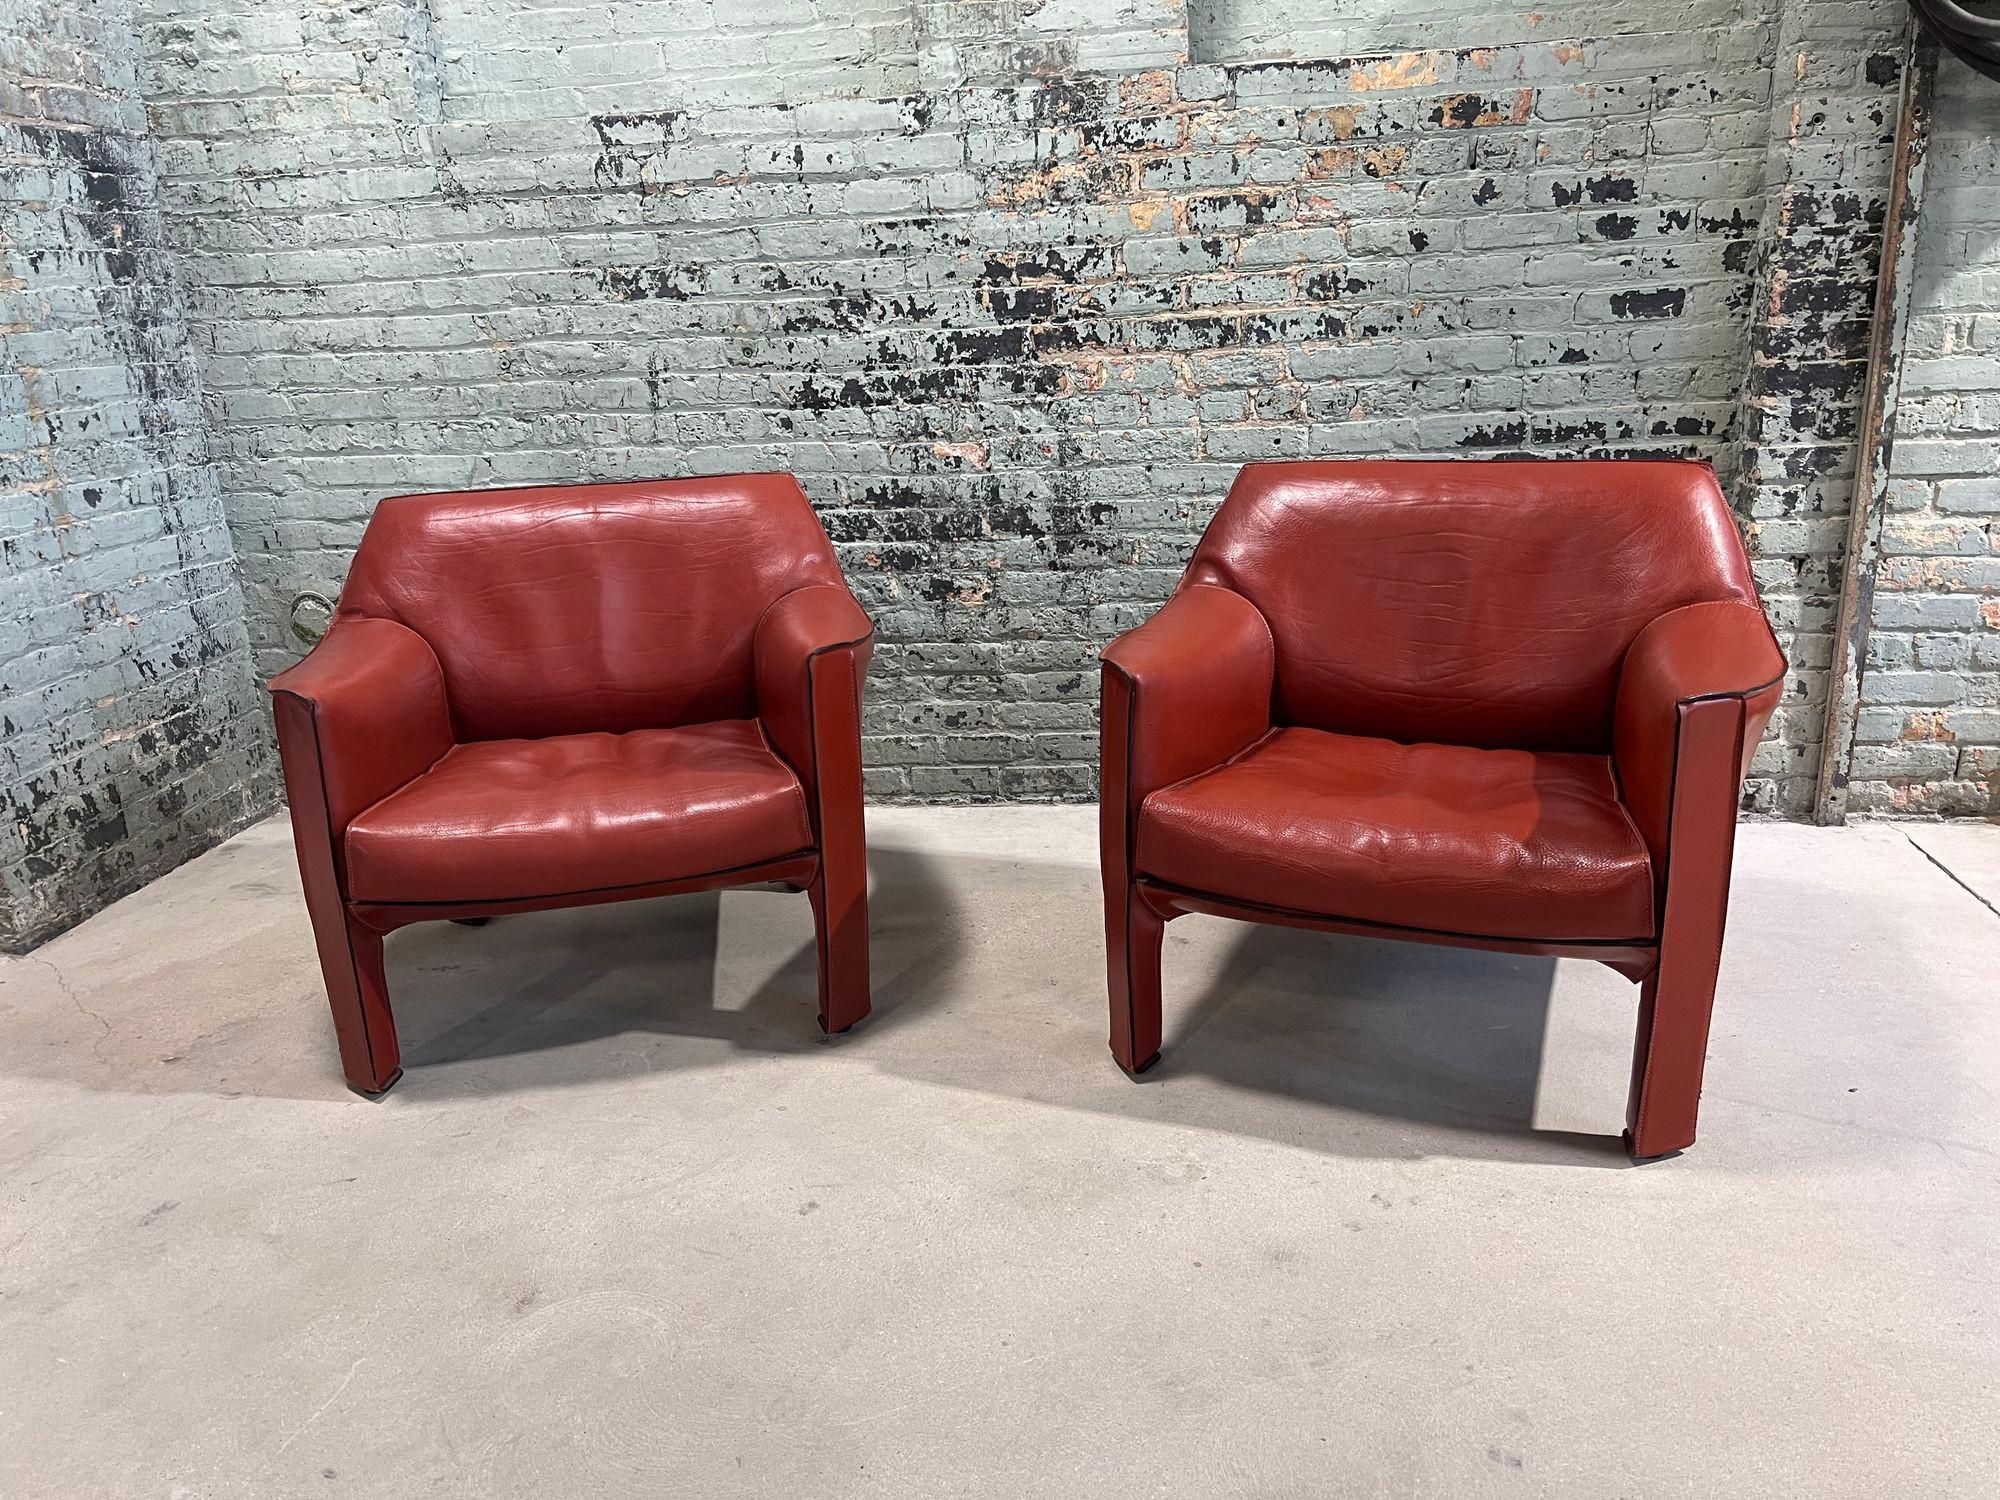 Post-Modern Mario Bellini Pair Leather Cab Lounge Chairs, Model 415, Italy 1970